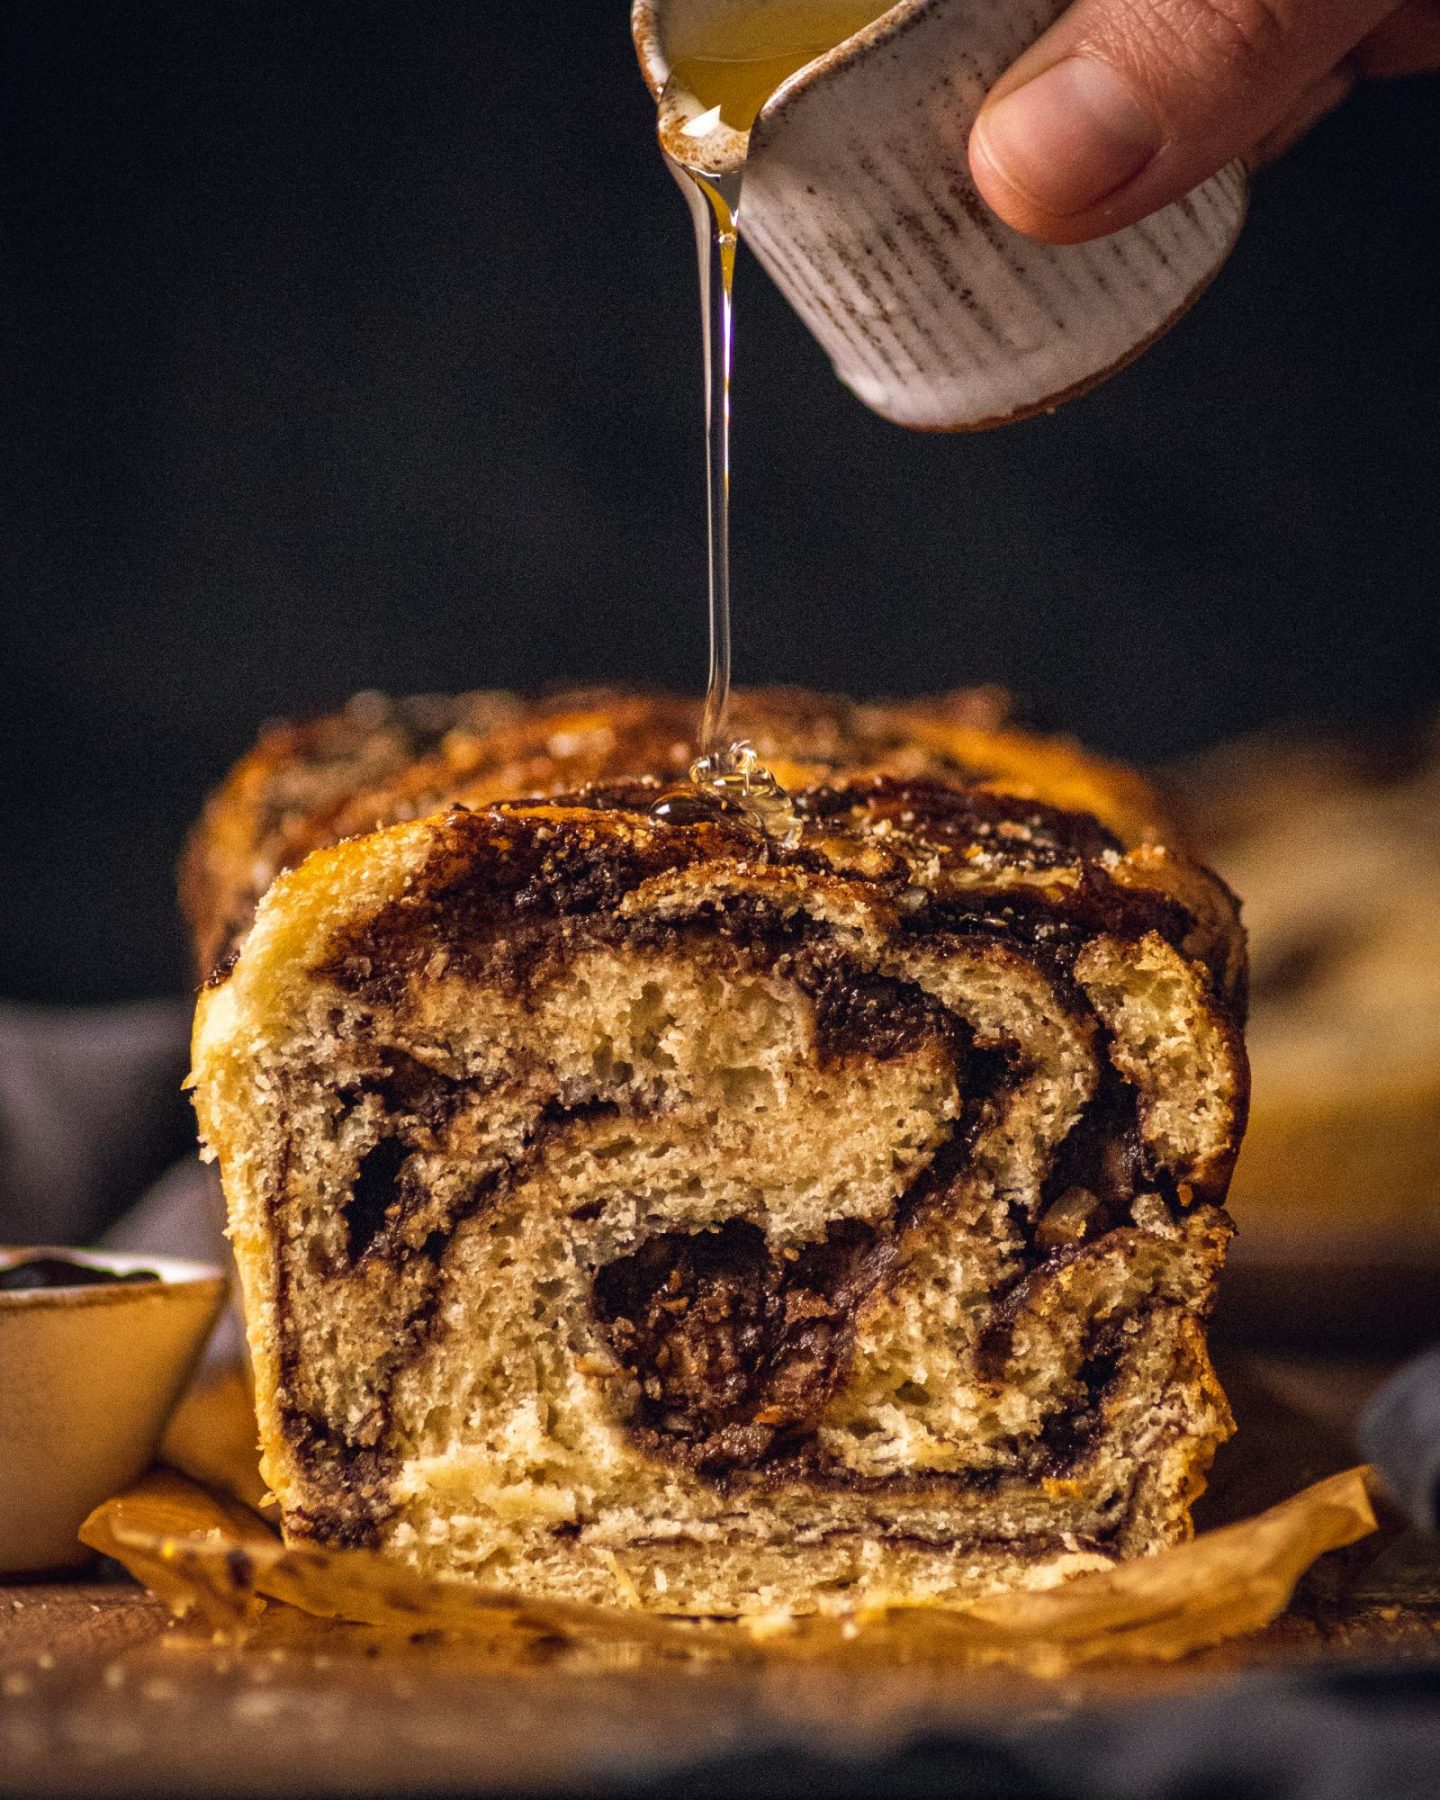 syrup being poured on a chocolate and hazelnut babka